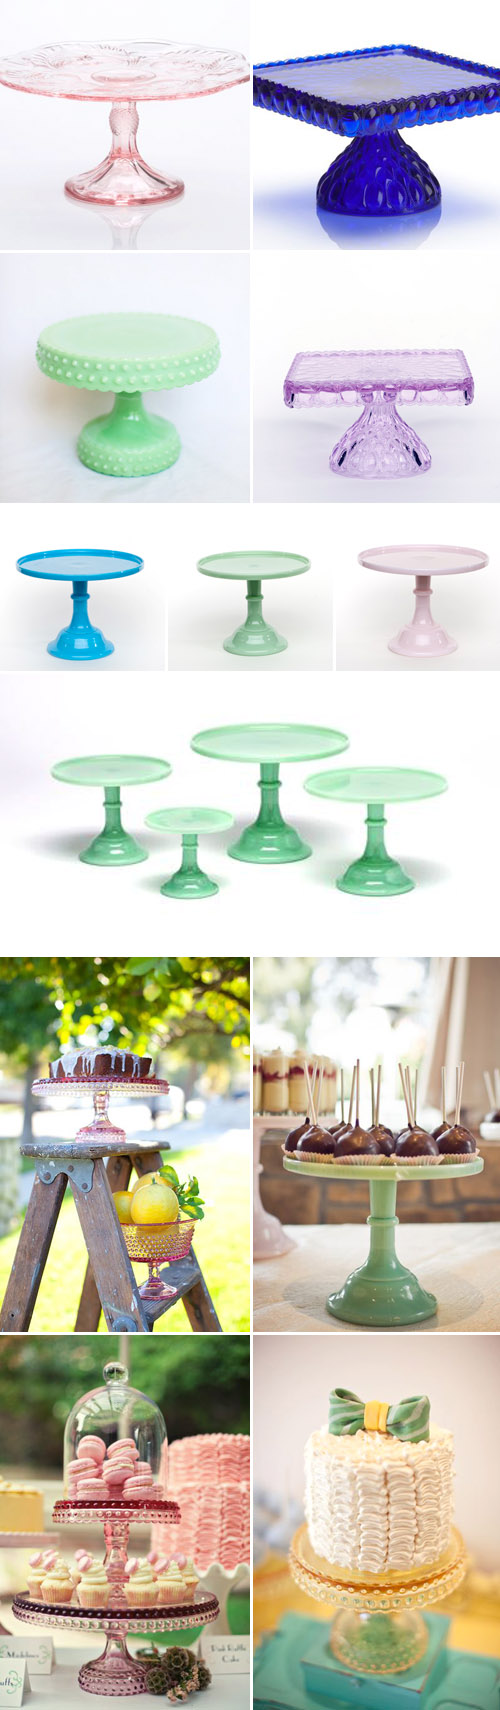 colorful wedding cake stands from Sweet and Saucy Supply Shop, vintage and milk glass cake stands via JunebugWeddings.com